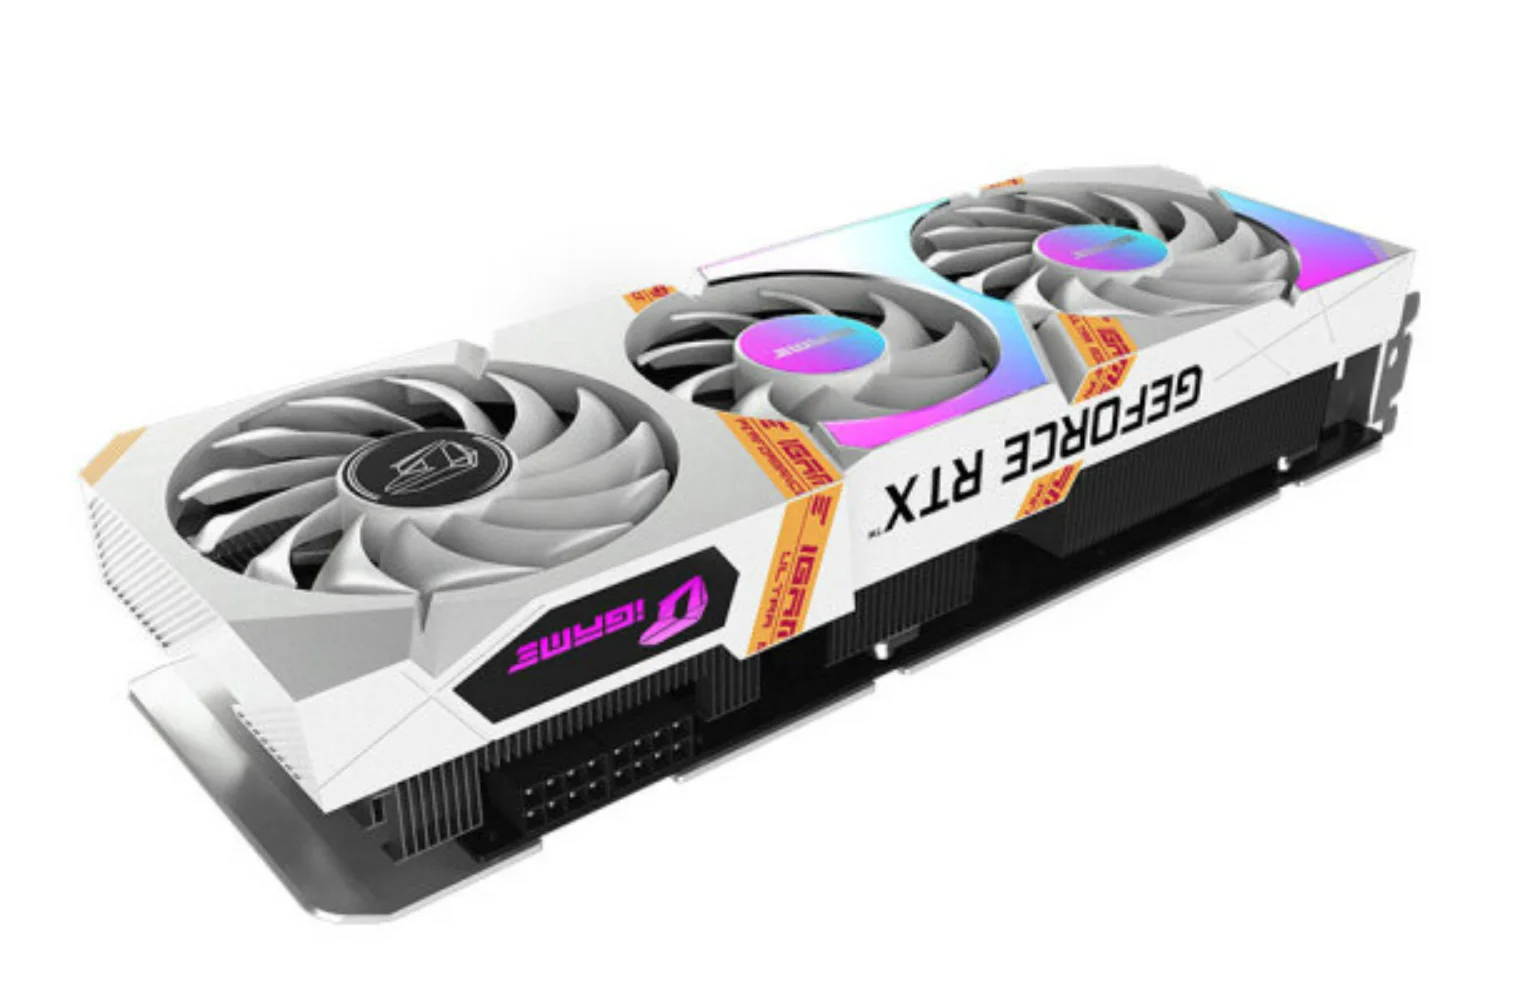 Rtx 3060 colorful ultra w 12g. Colorful RTX 3060 12gb. Colorful IGAME GEFORCE RTX 3060 ti Ultra w OC. Colorful GEFORCE RTX 3060 12 ГБ (IGAME GEFORCE RTX 3060 Ultra w OC 12g l-v), LHR. RTX 3060 12gb colorful IGAME.